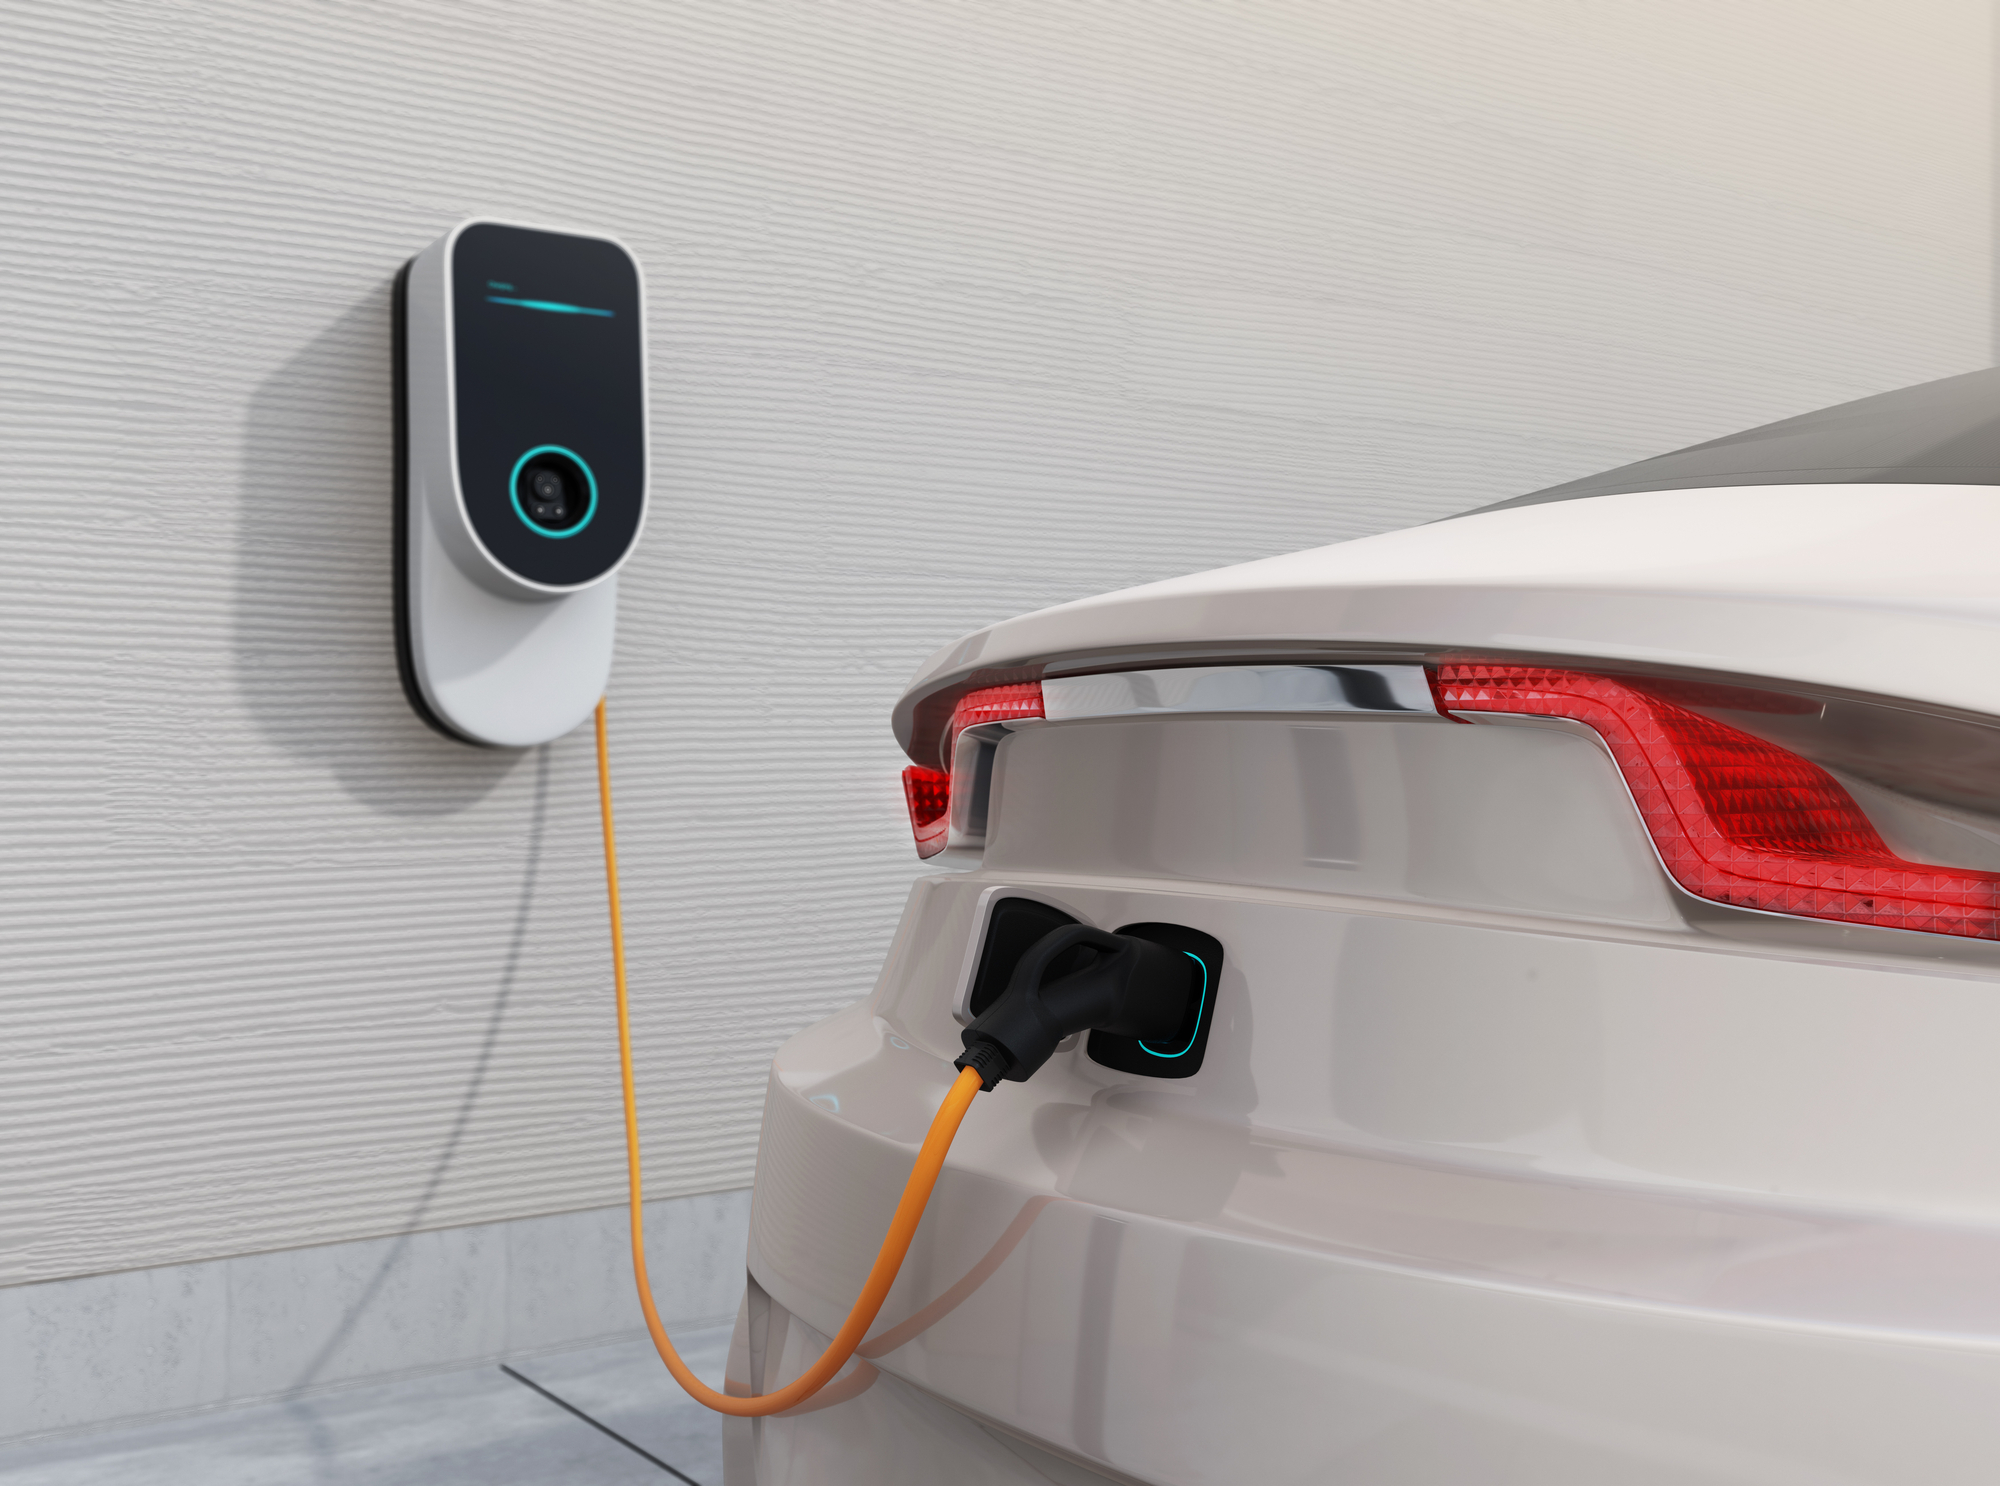 Electric car plugged into a wall-mounted charging station at home